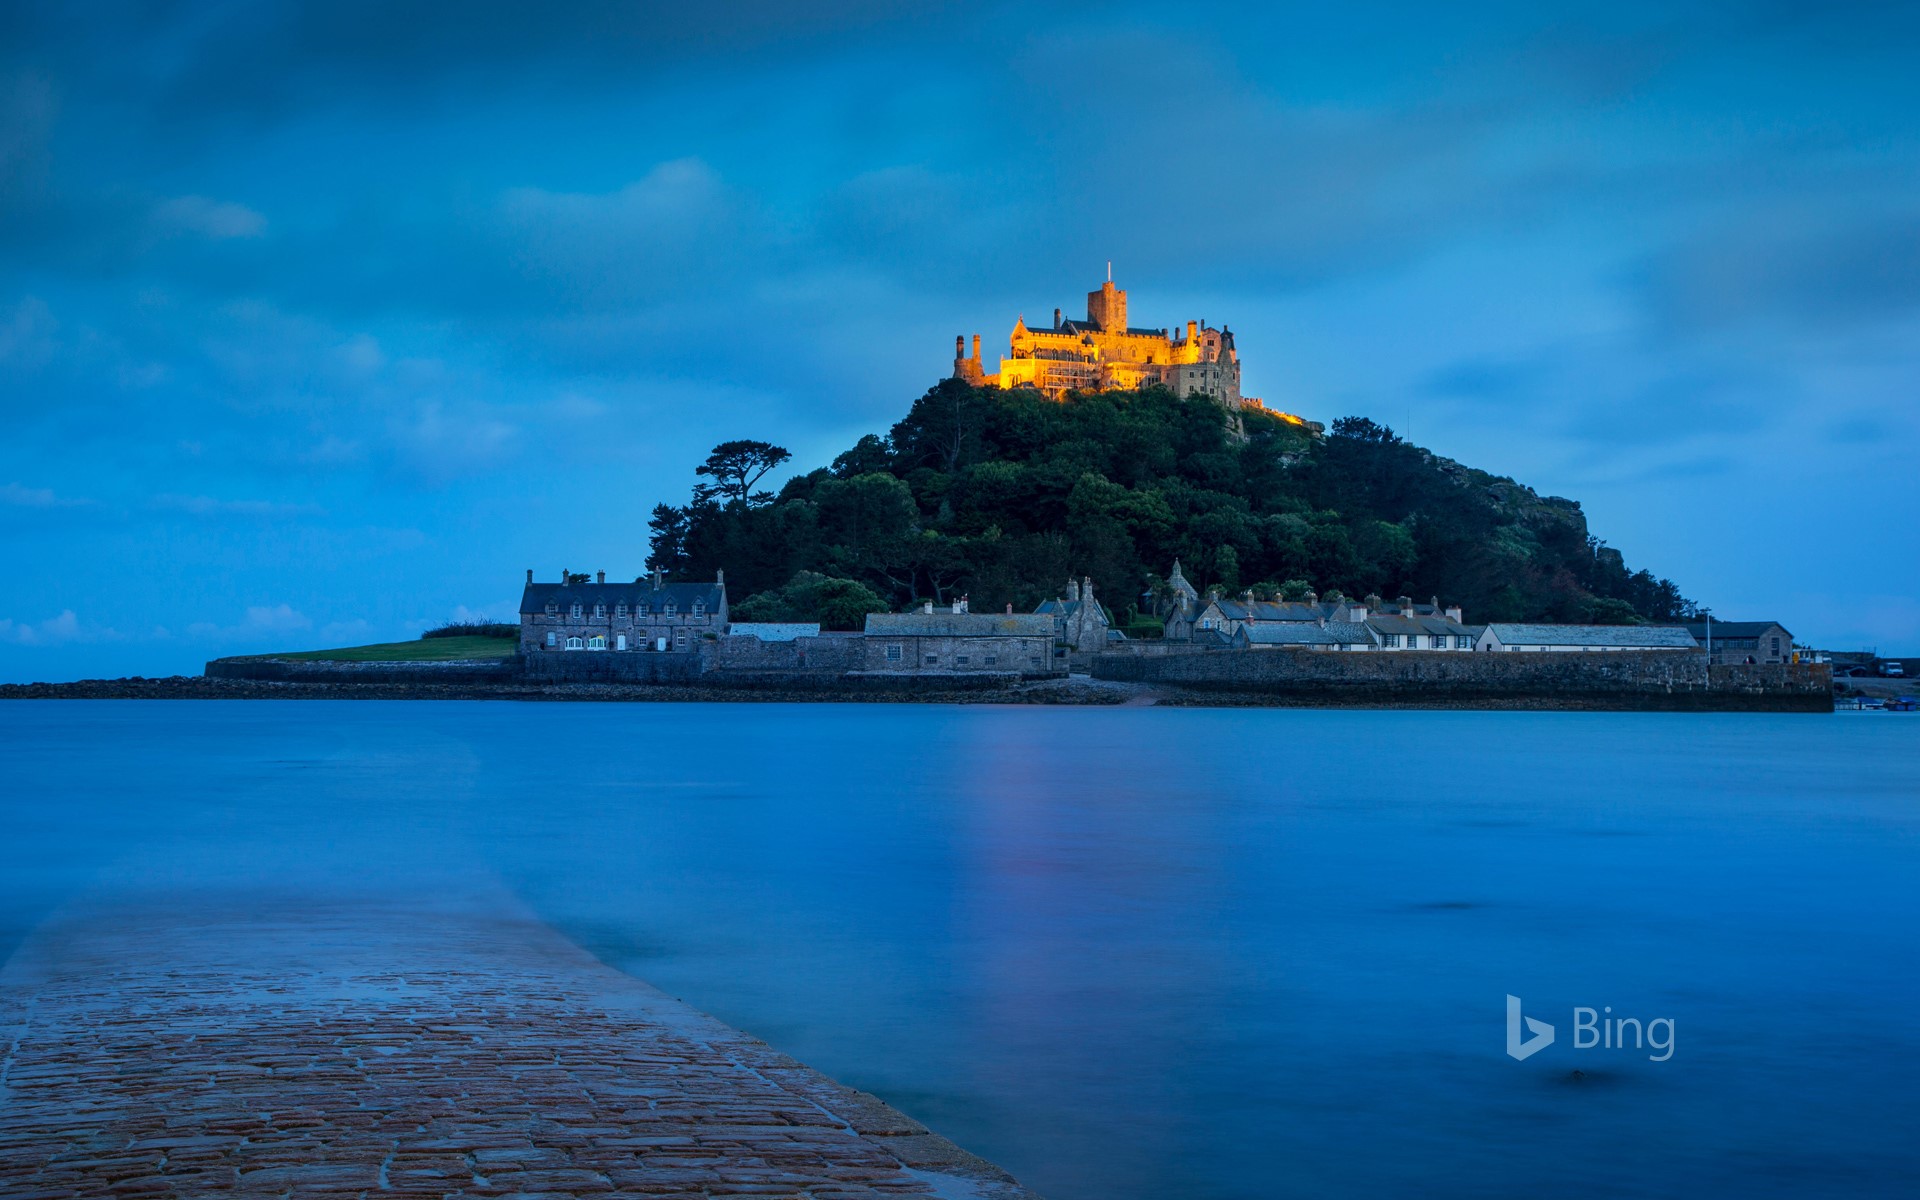 Twilight over St Michael's Mount in Mount's Bay, Cornwall, England